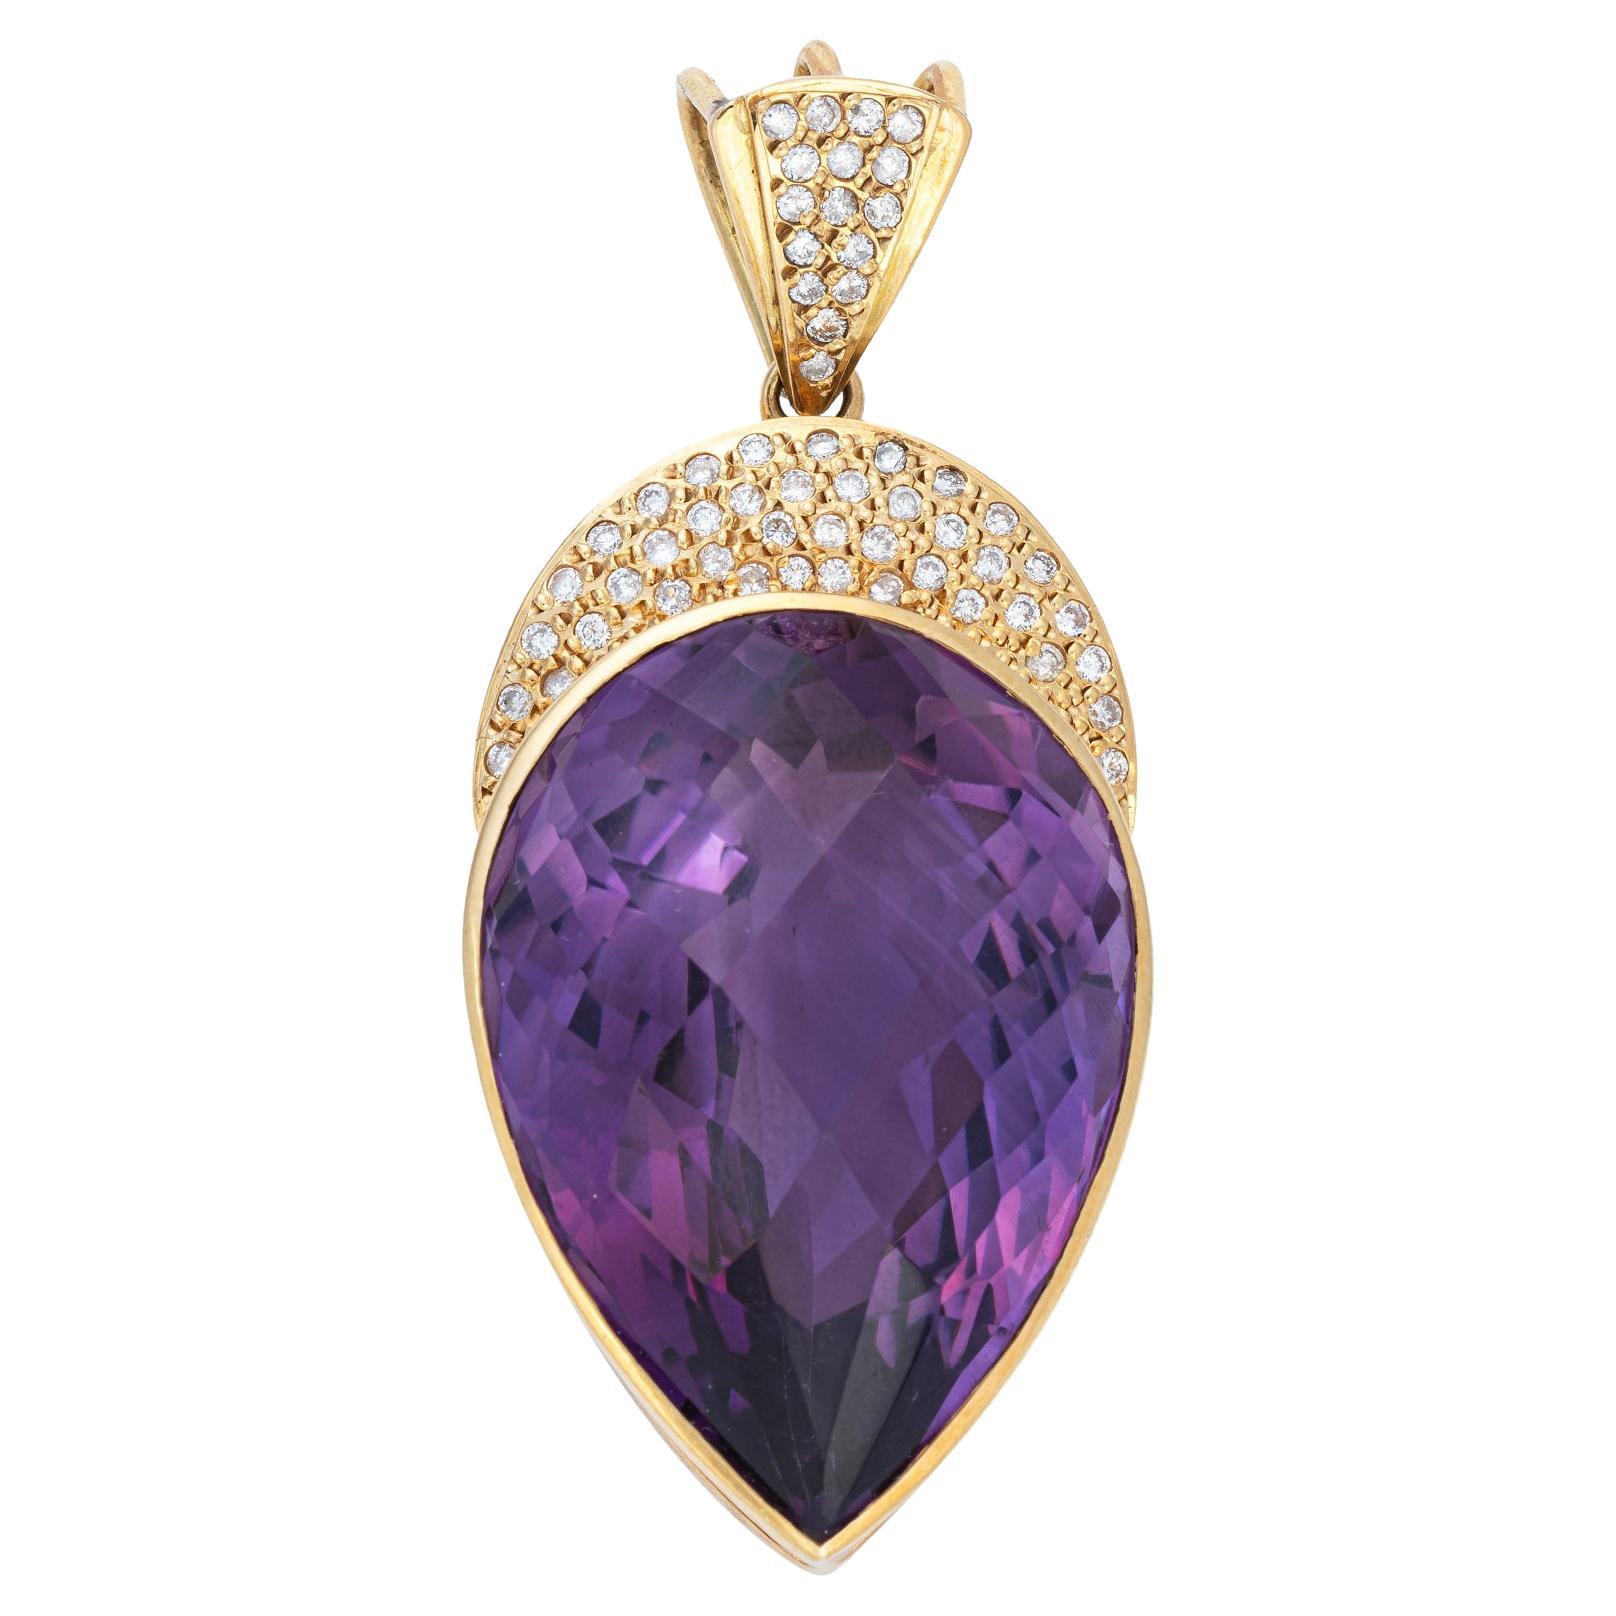 Huge 65ct Amethyst Pendant 14k Yellow Gold Diamond Pear Cut Vintage Jewelry For Sale